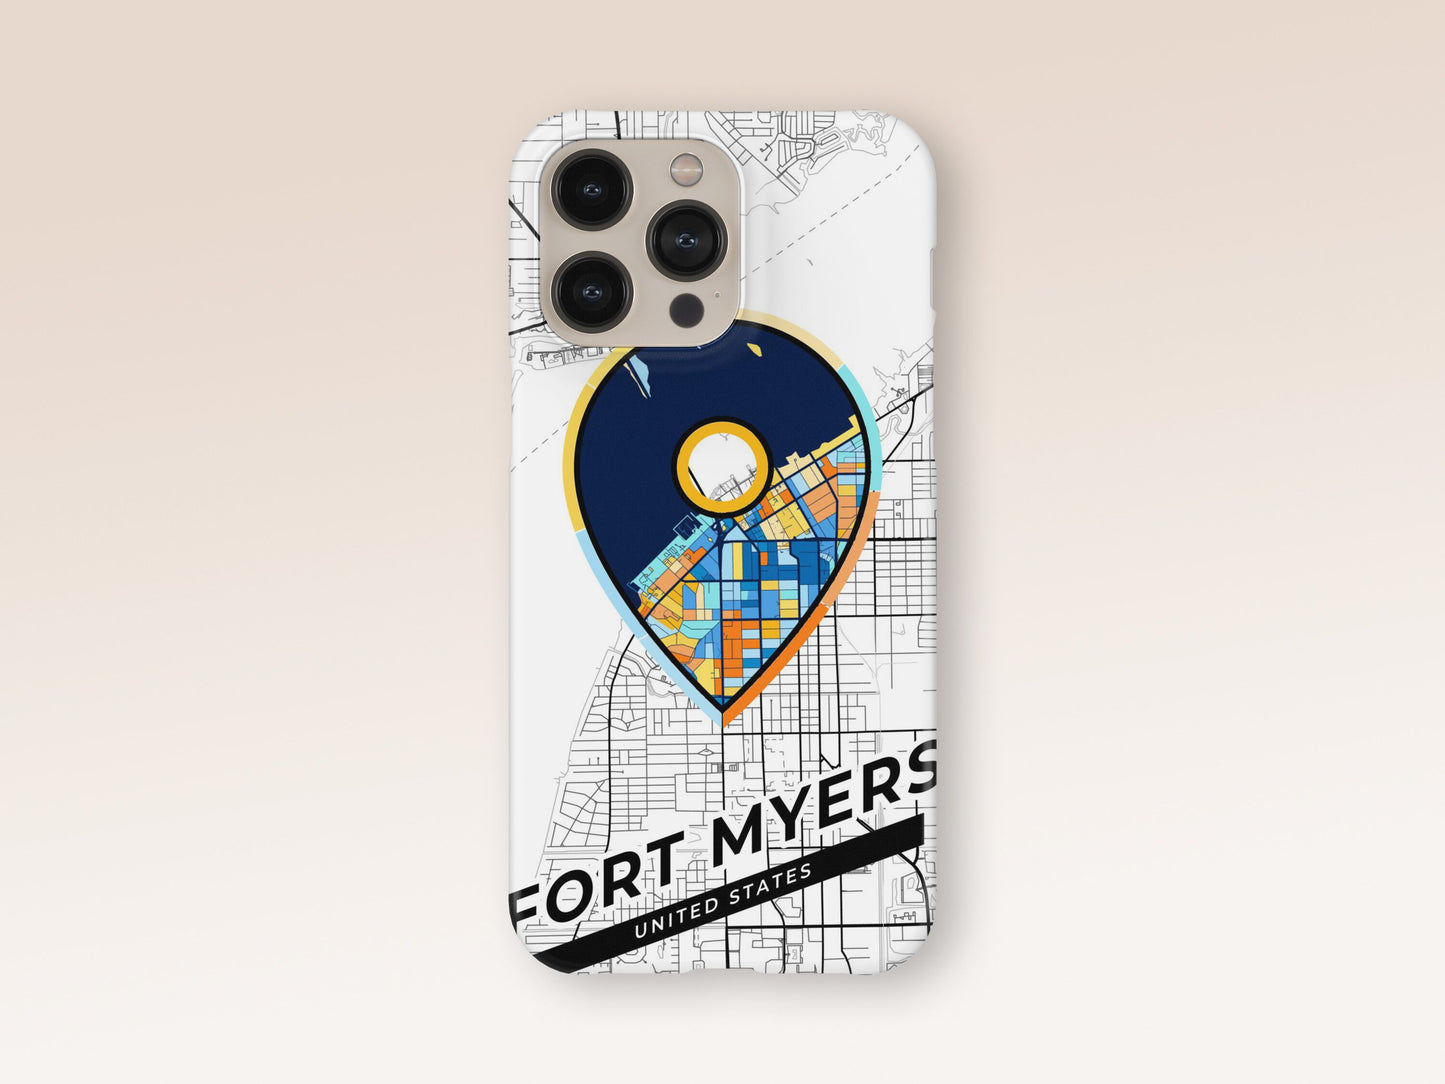 Fort Myers Florida slim phone case with colorful icon. Birthday, wedding or housewarming gift. Couple match cases. 1